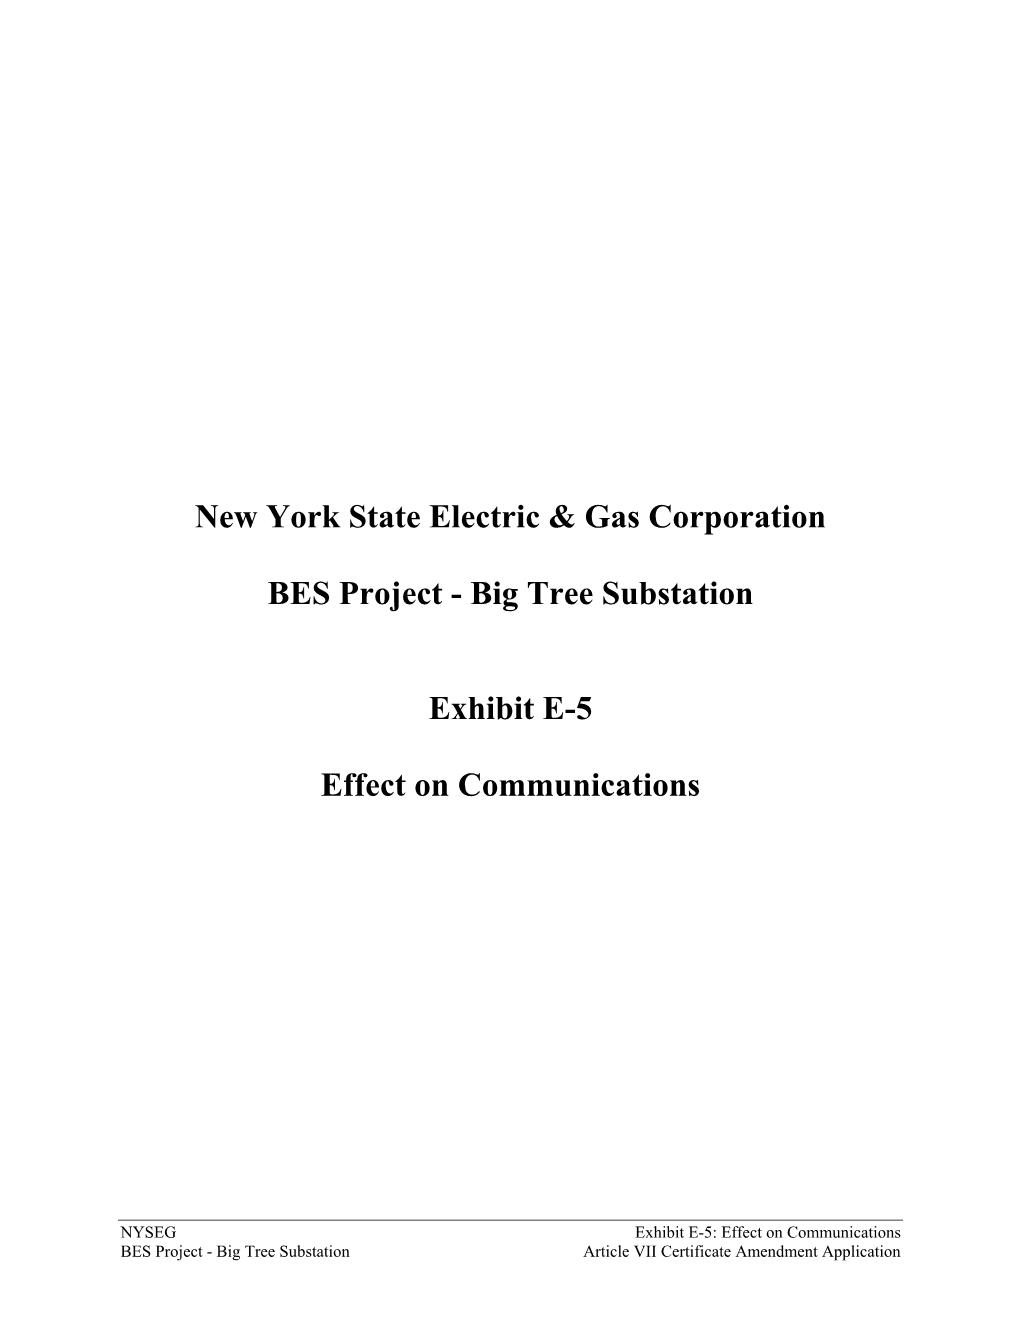 New York State Electric & Gas Corporation BES Project